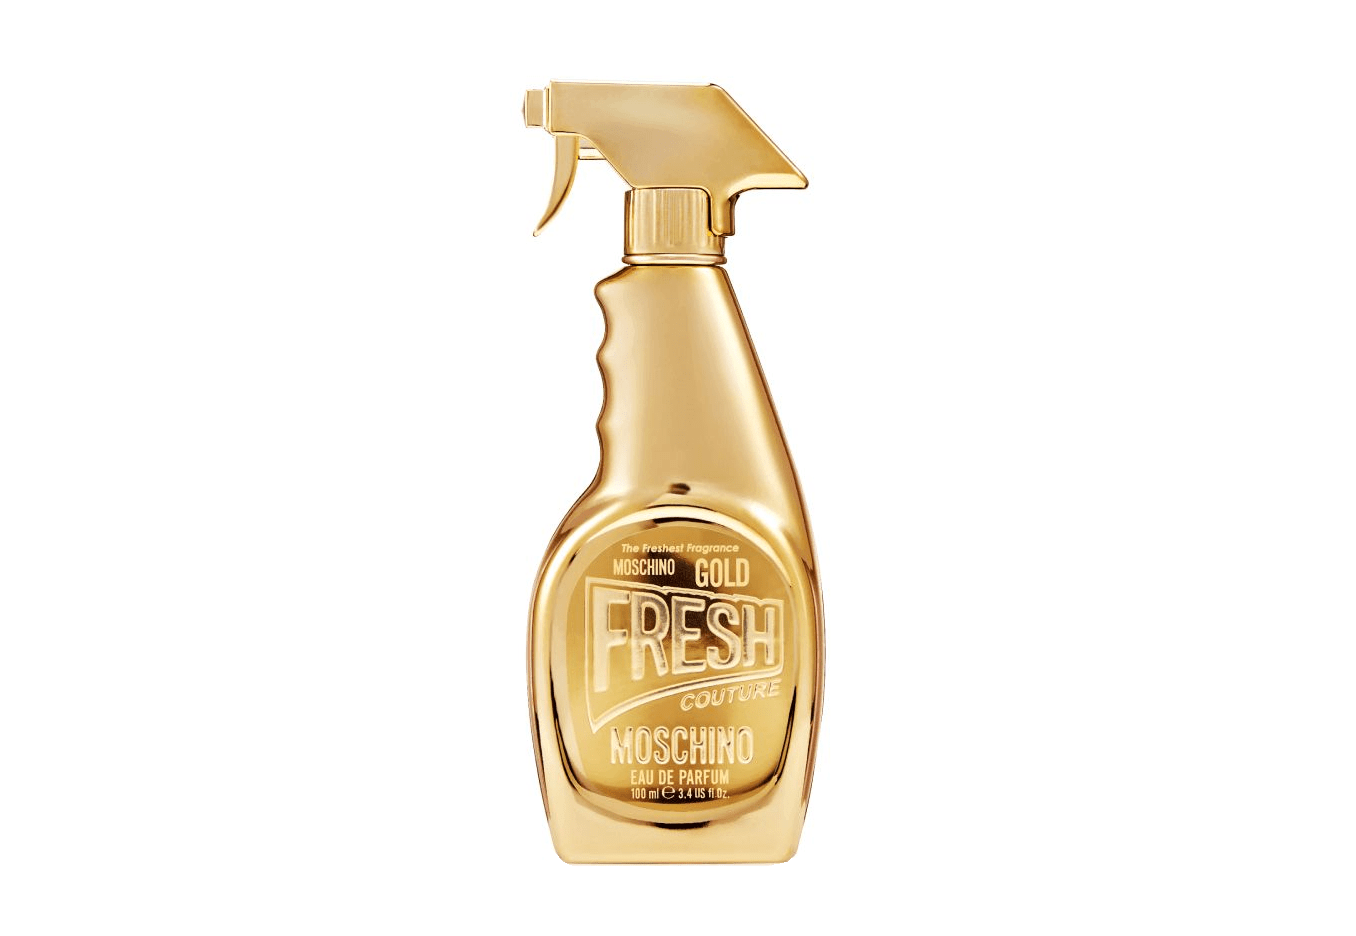 Celes (セレス) | Moschino - Gold Fresh Couture(モスキーノ